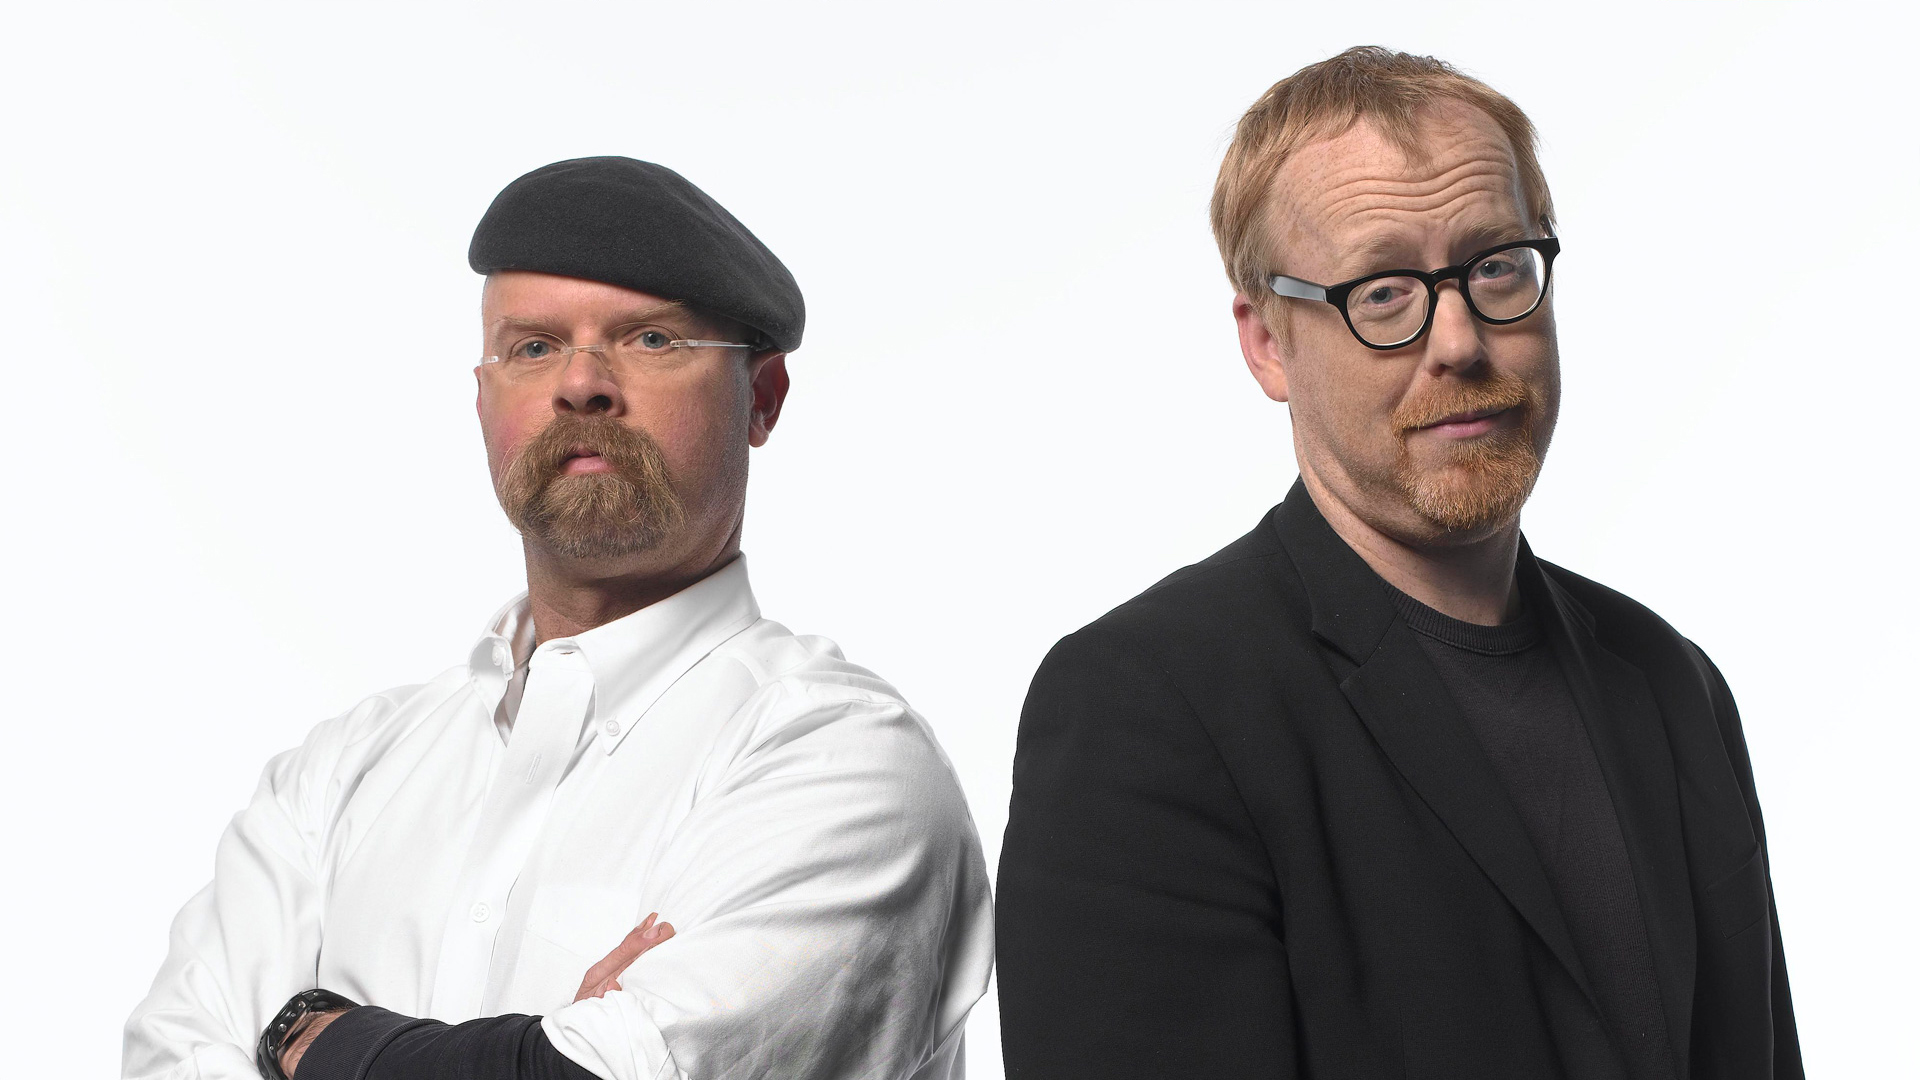 TV Show Mythbusters 1920x1080